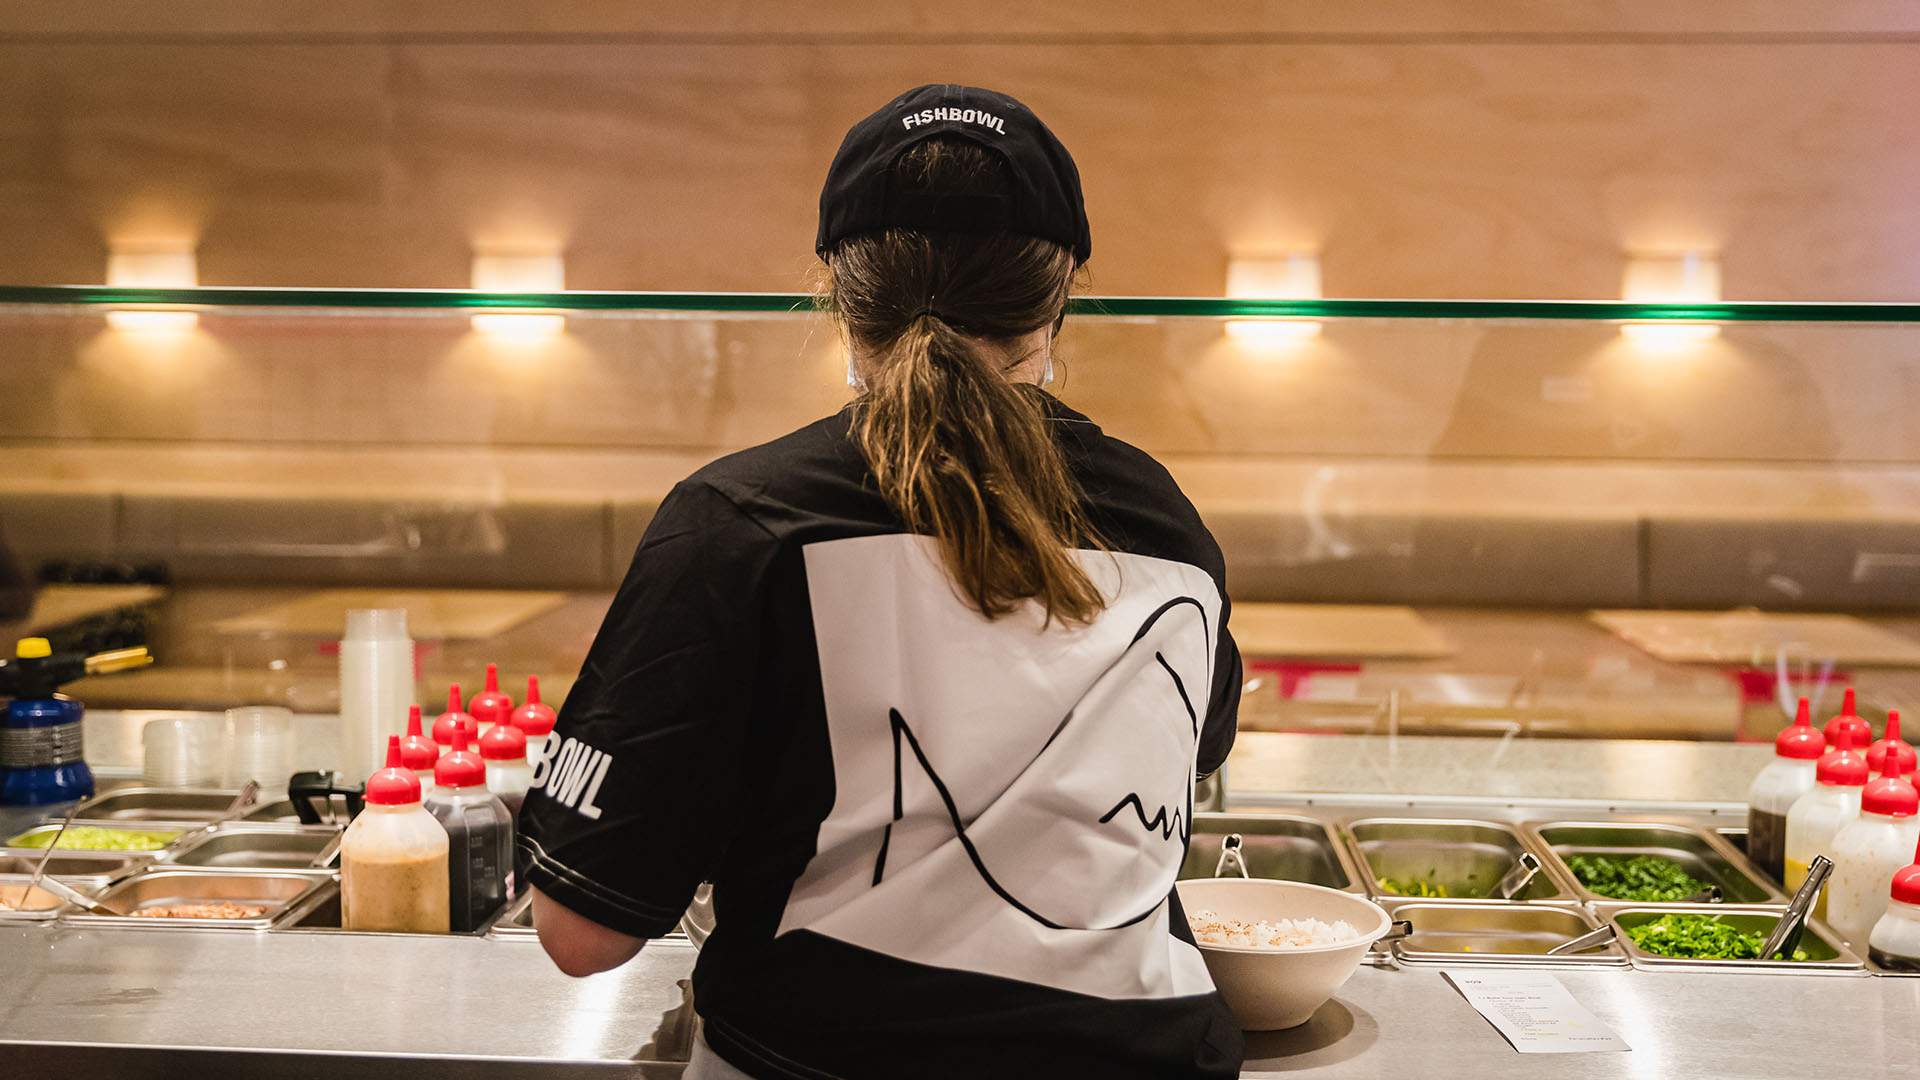 Sydney's Japanese-Inspired Salad Chain Fishbowl Is Opening Its First Brisbane Store in Newstead